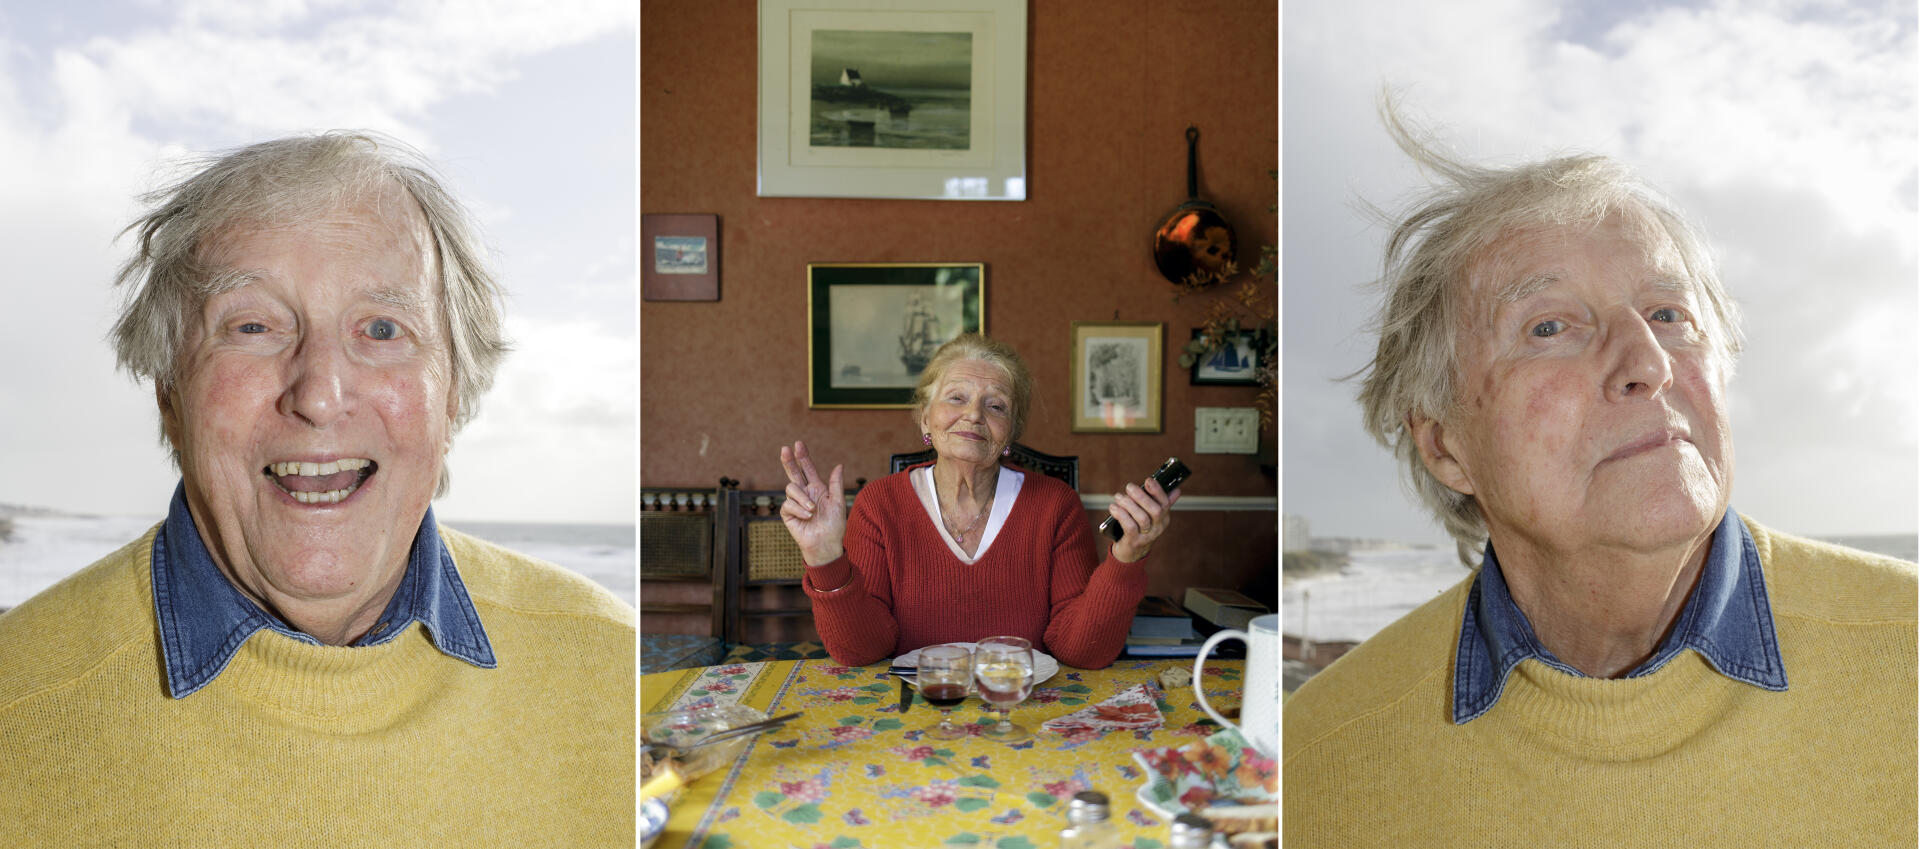 Left and right: Antoine Mongenie, 90, at his home in Les Sables-d'Olonne, November 21, 2022. In the middle: Marie-Thérèse Jestin, in her house in Etables-sur-Mer (Côtes-d' Armor), Friday, November 18, 2022.